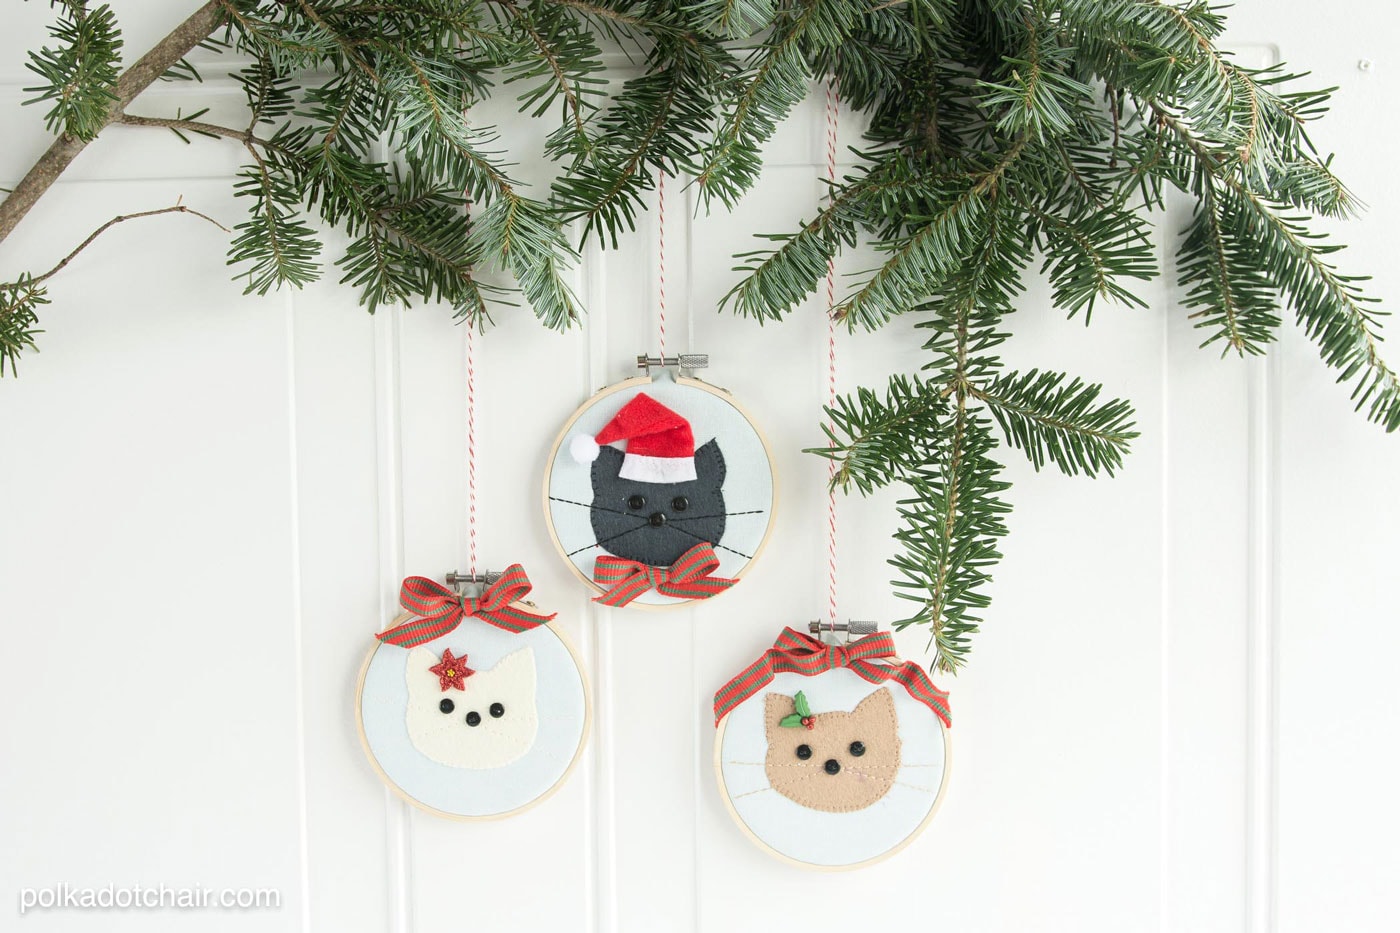 DIY Cat Embroidery Hoop Christmas Ornaments with instructions and free sewing pattern on polkadotchair.com